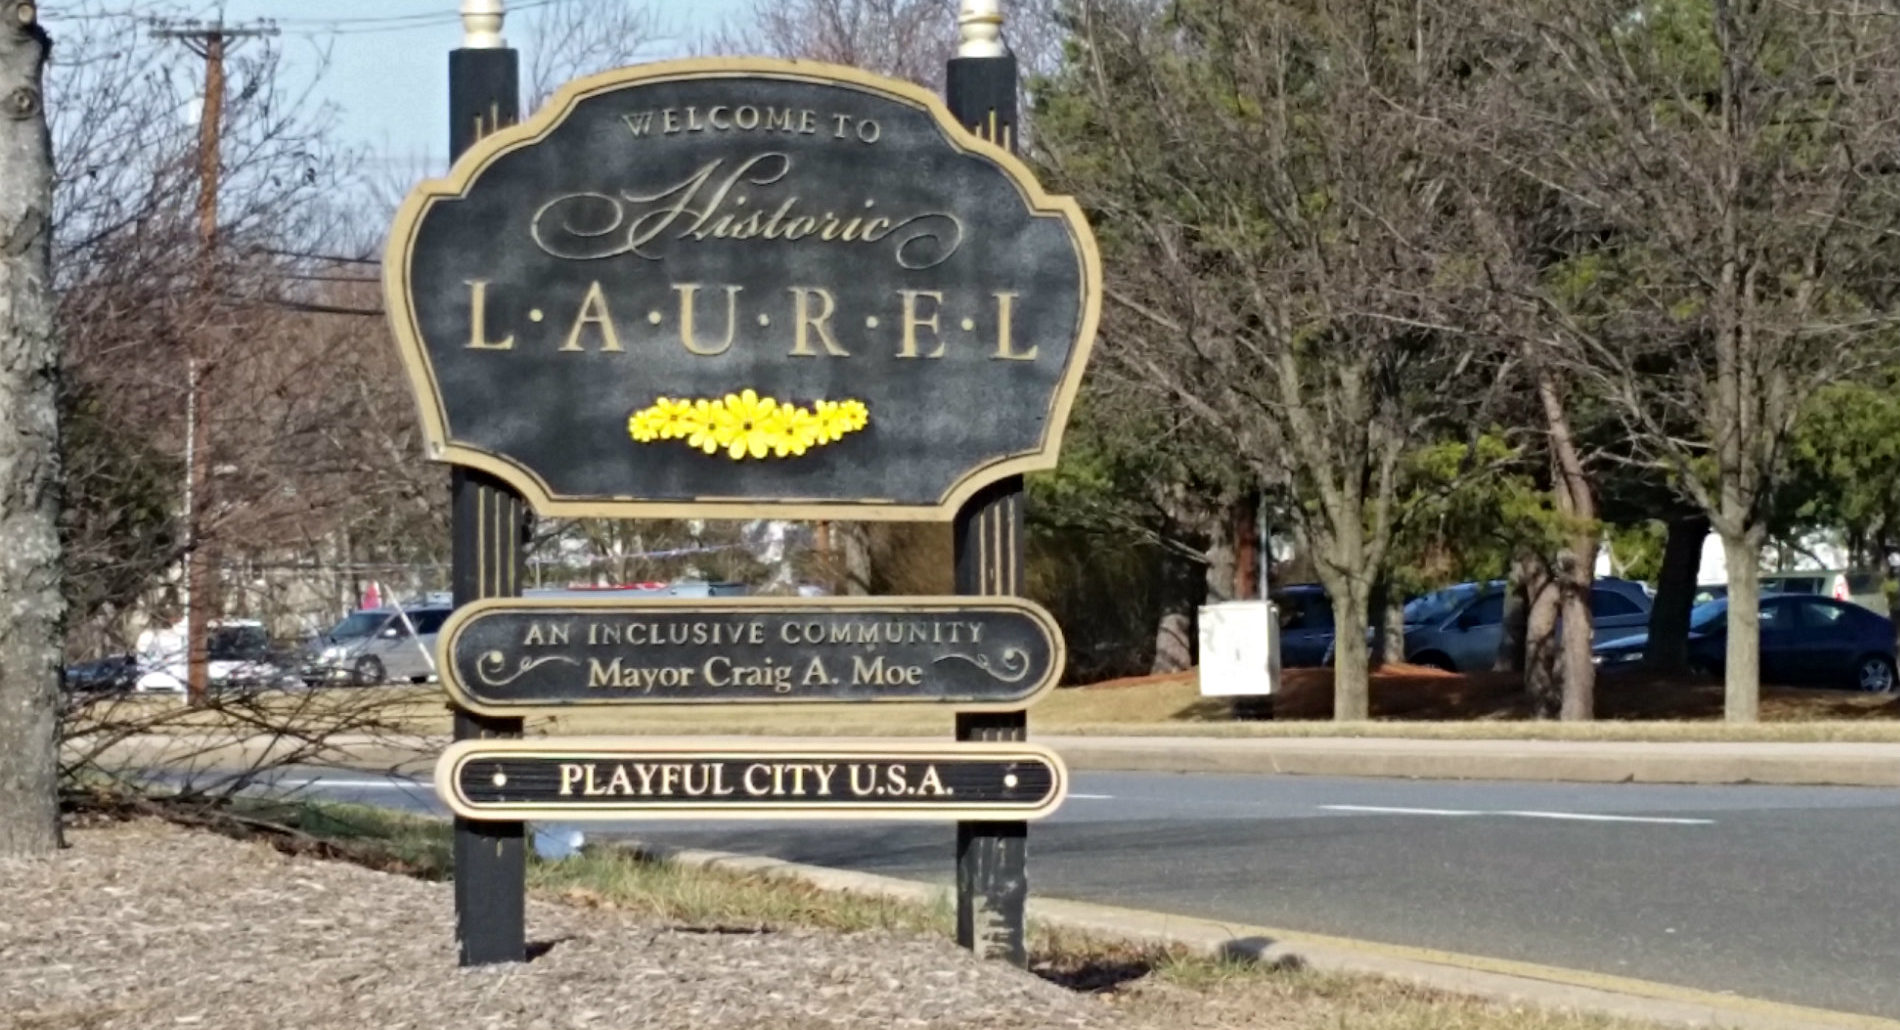 Large exterior black and beige sign that says welcome to historic laurel, an inclusive community, playful city USA